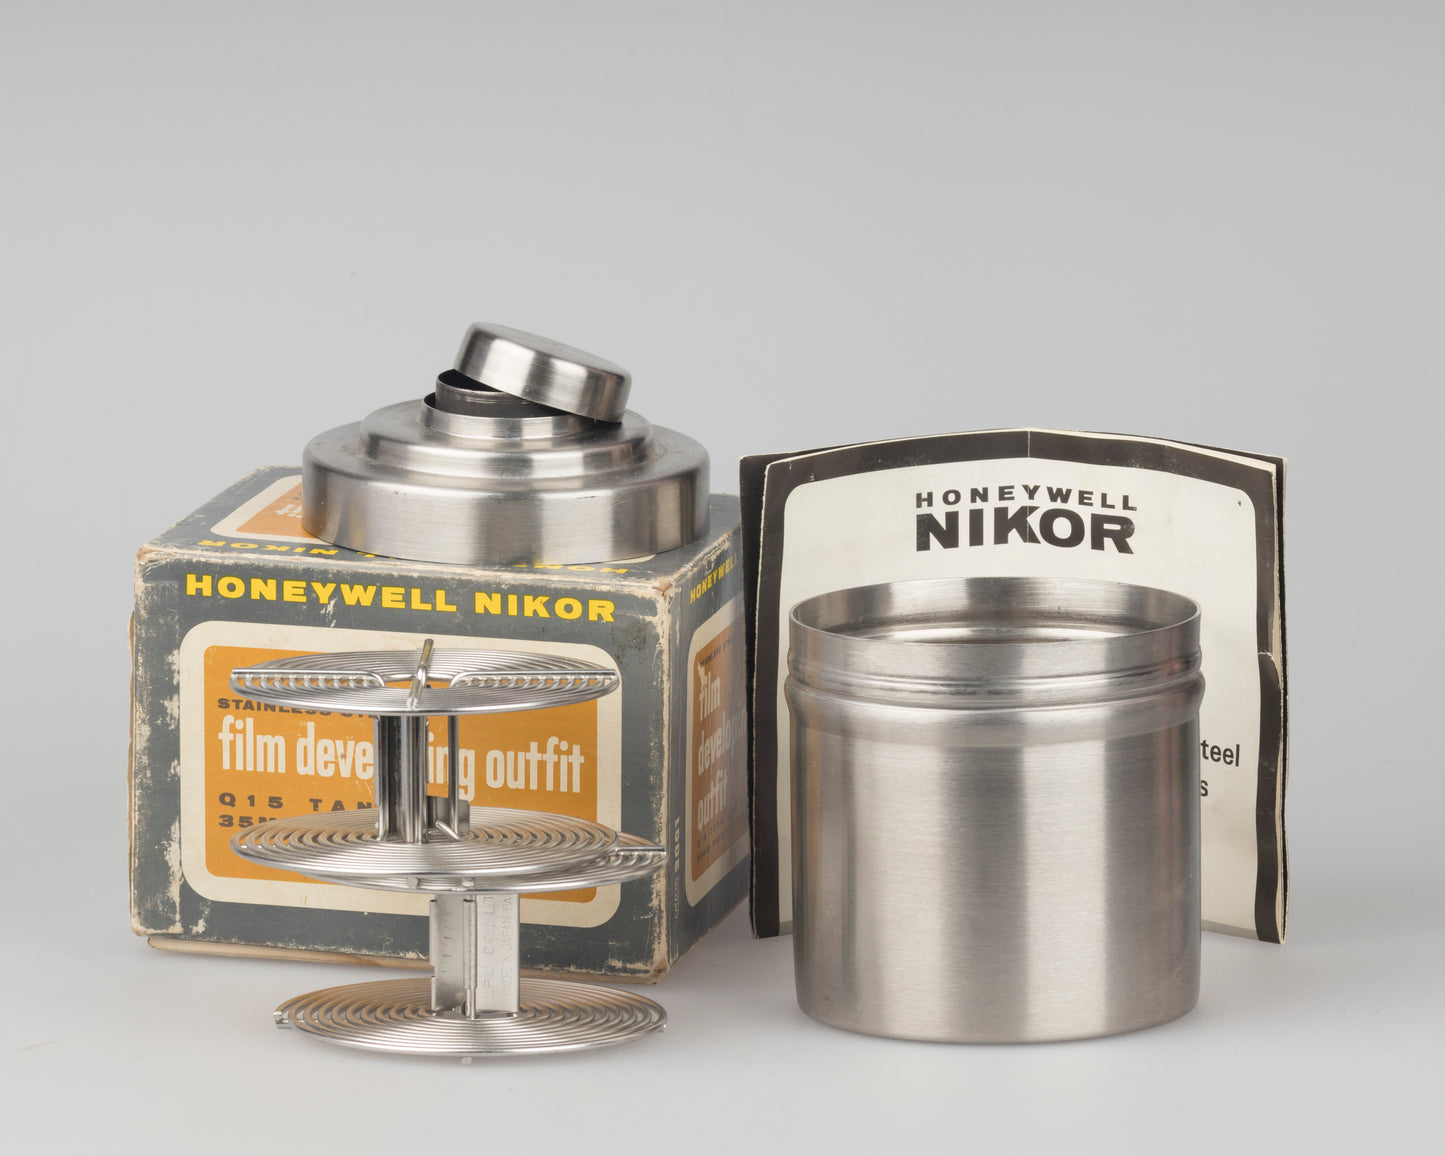 Honeywell Nikor Q15 stainless steel film developing tank with two 35mm reels